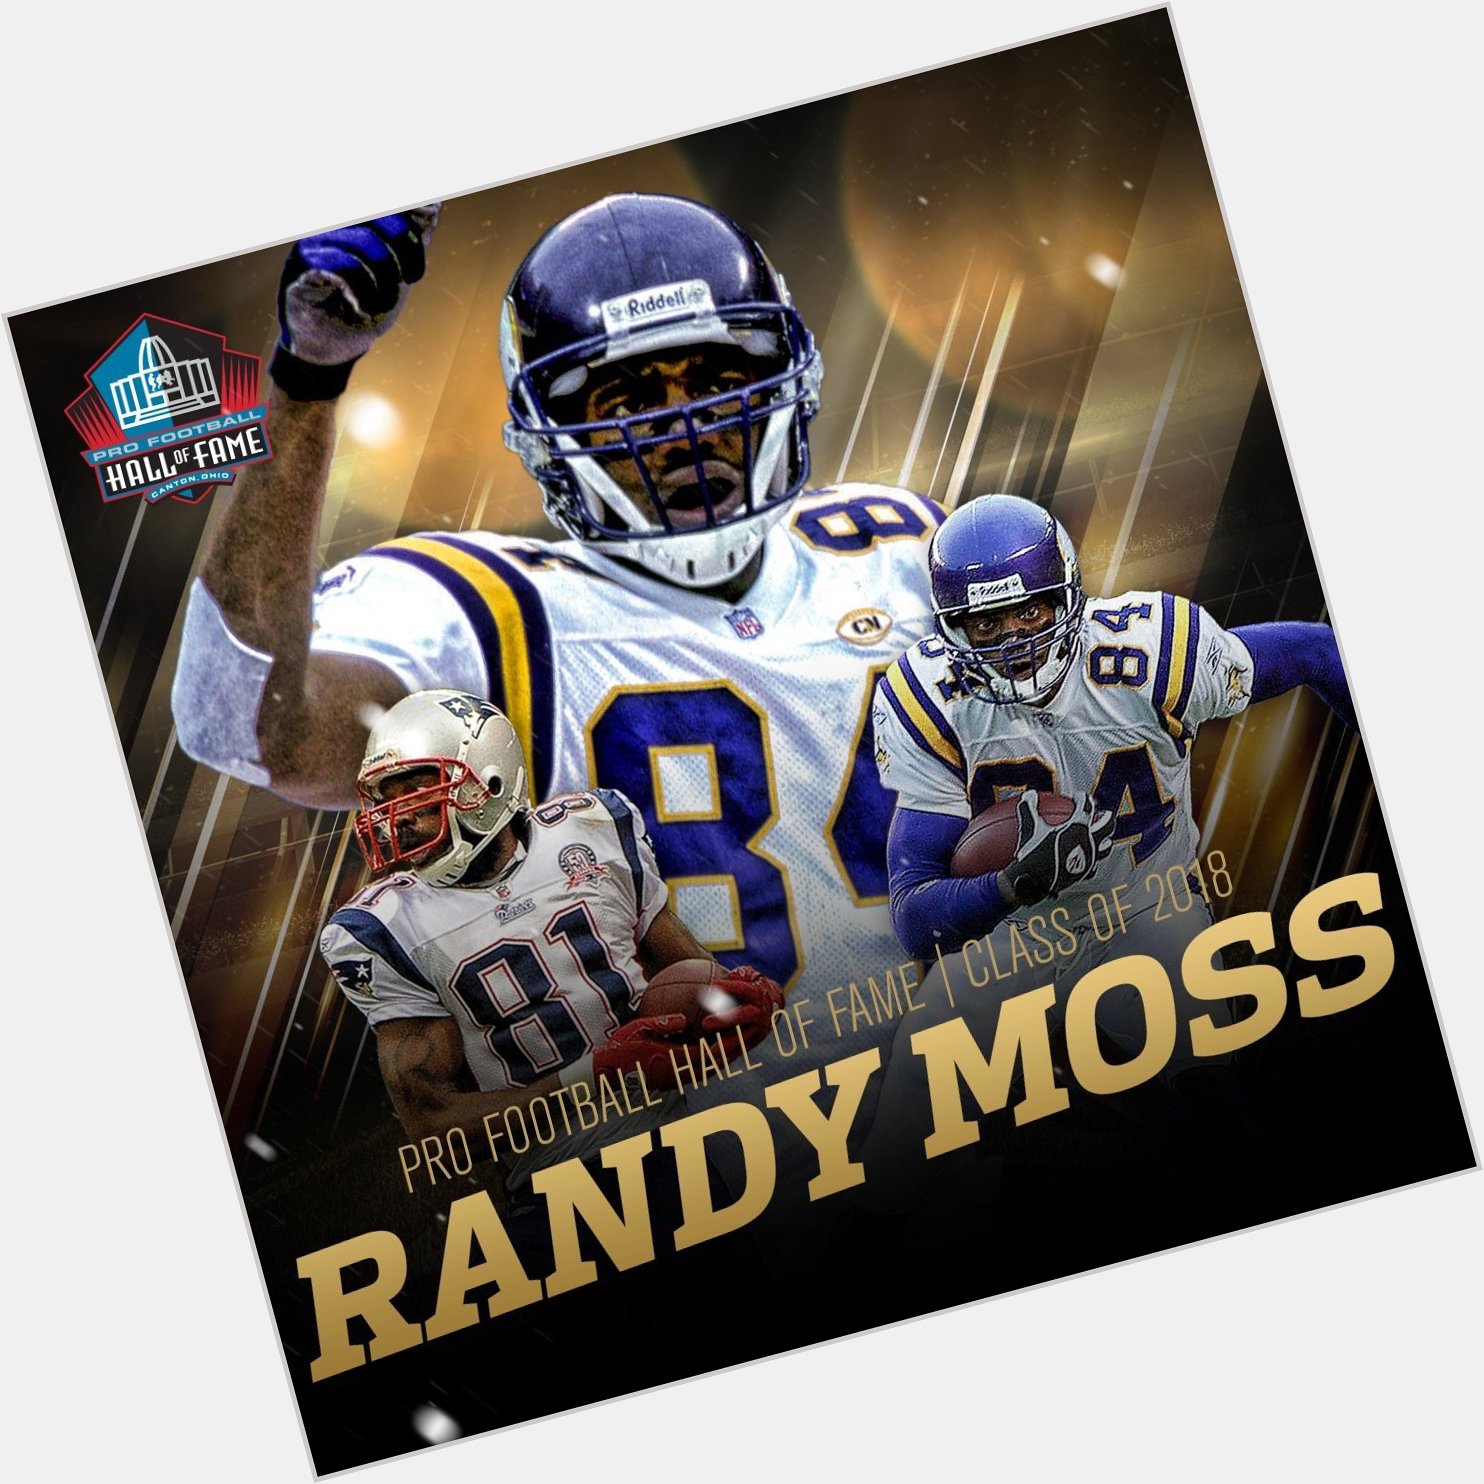 HAPPY BIRTHDAY TO THE GREATEST NFL WIDE RECEIVER OF ALL TIME......THE RANDY MOSS  